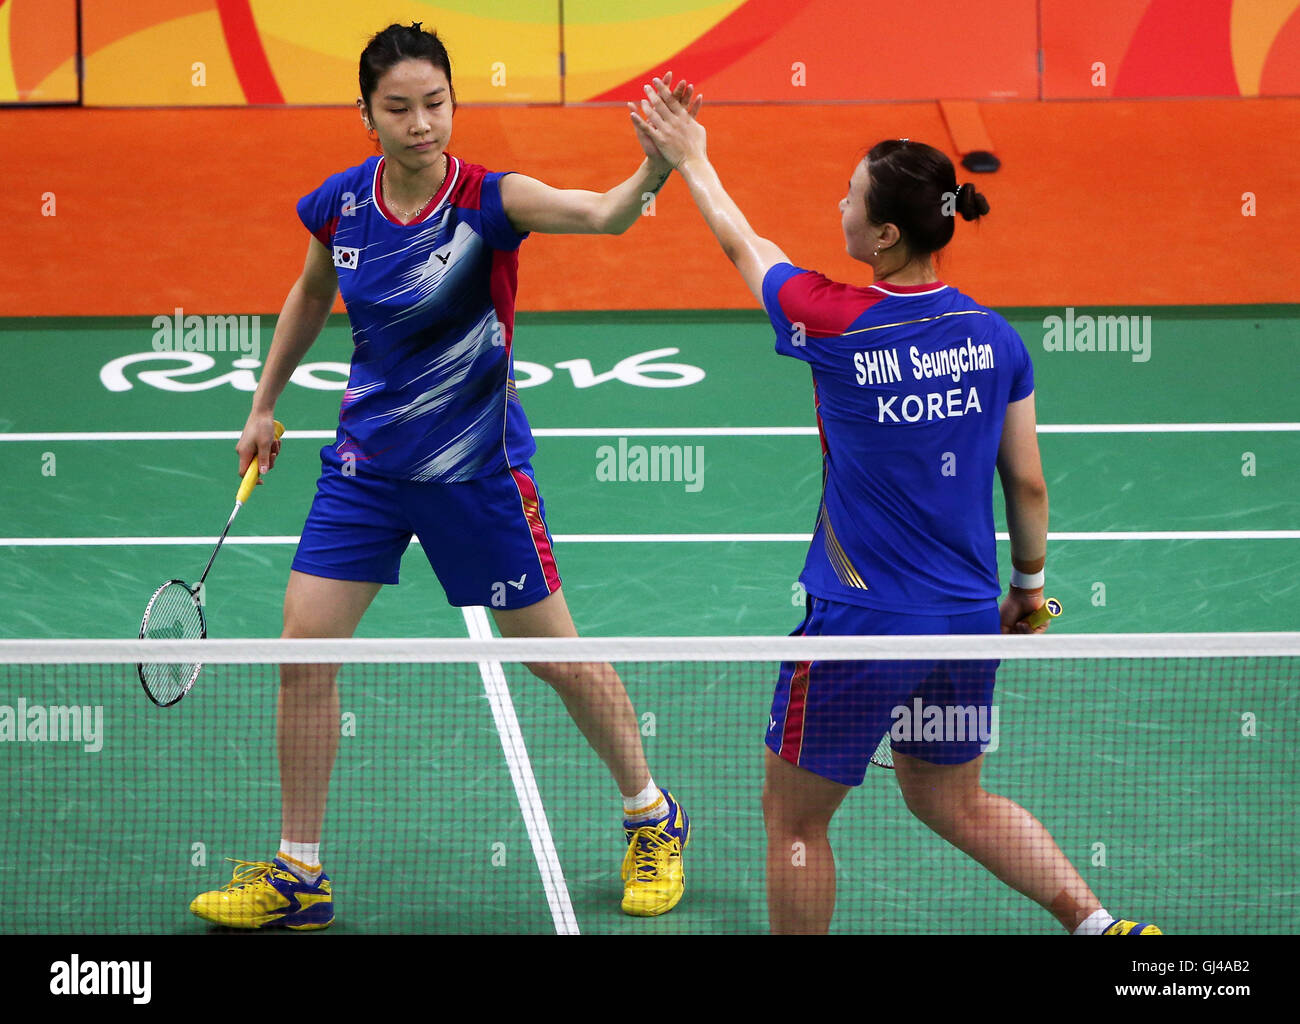 Rio De Janeiro, Brazil. 12th Aug, 2016. South Korea's Jung Kyung Eun (L) and Shin Seung Chan react during women's doubles group play stage match of Badminton against China's Luo Ying and Luo Yu at the 2016 Rio Olympic Games in Rio de Janeiro, Brazil, on Aug. 12, 2016. Jung Kyung Eun and Shin Seung Chang won the match 2-0. Credit:  Qin Lang/Xinhua/Alamy Live News Stock Photo